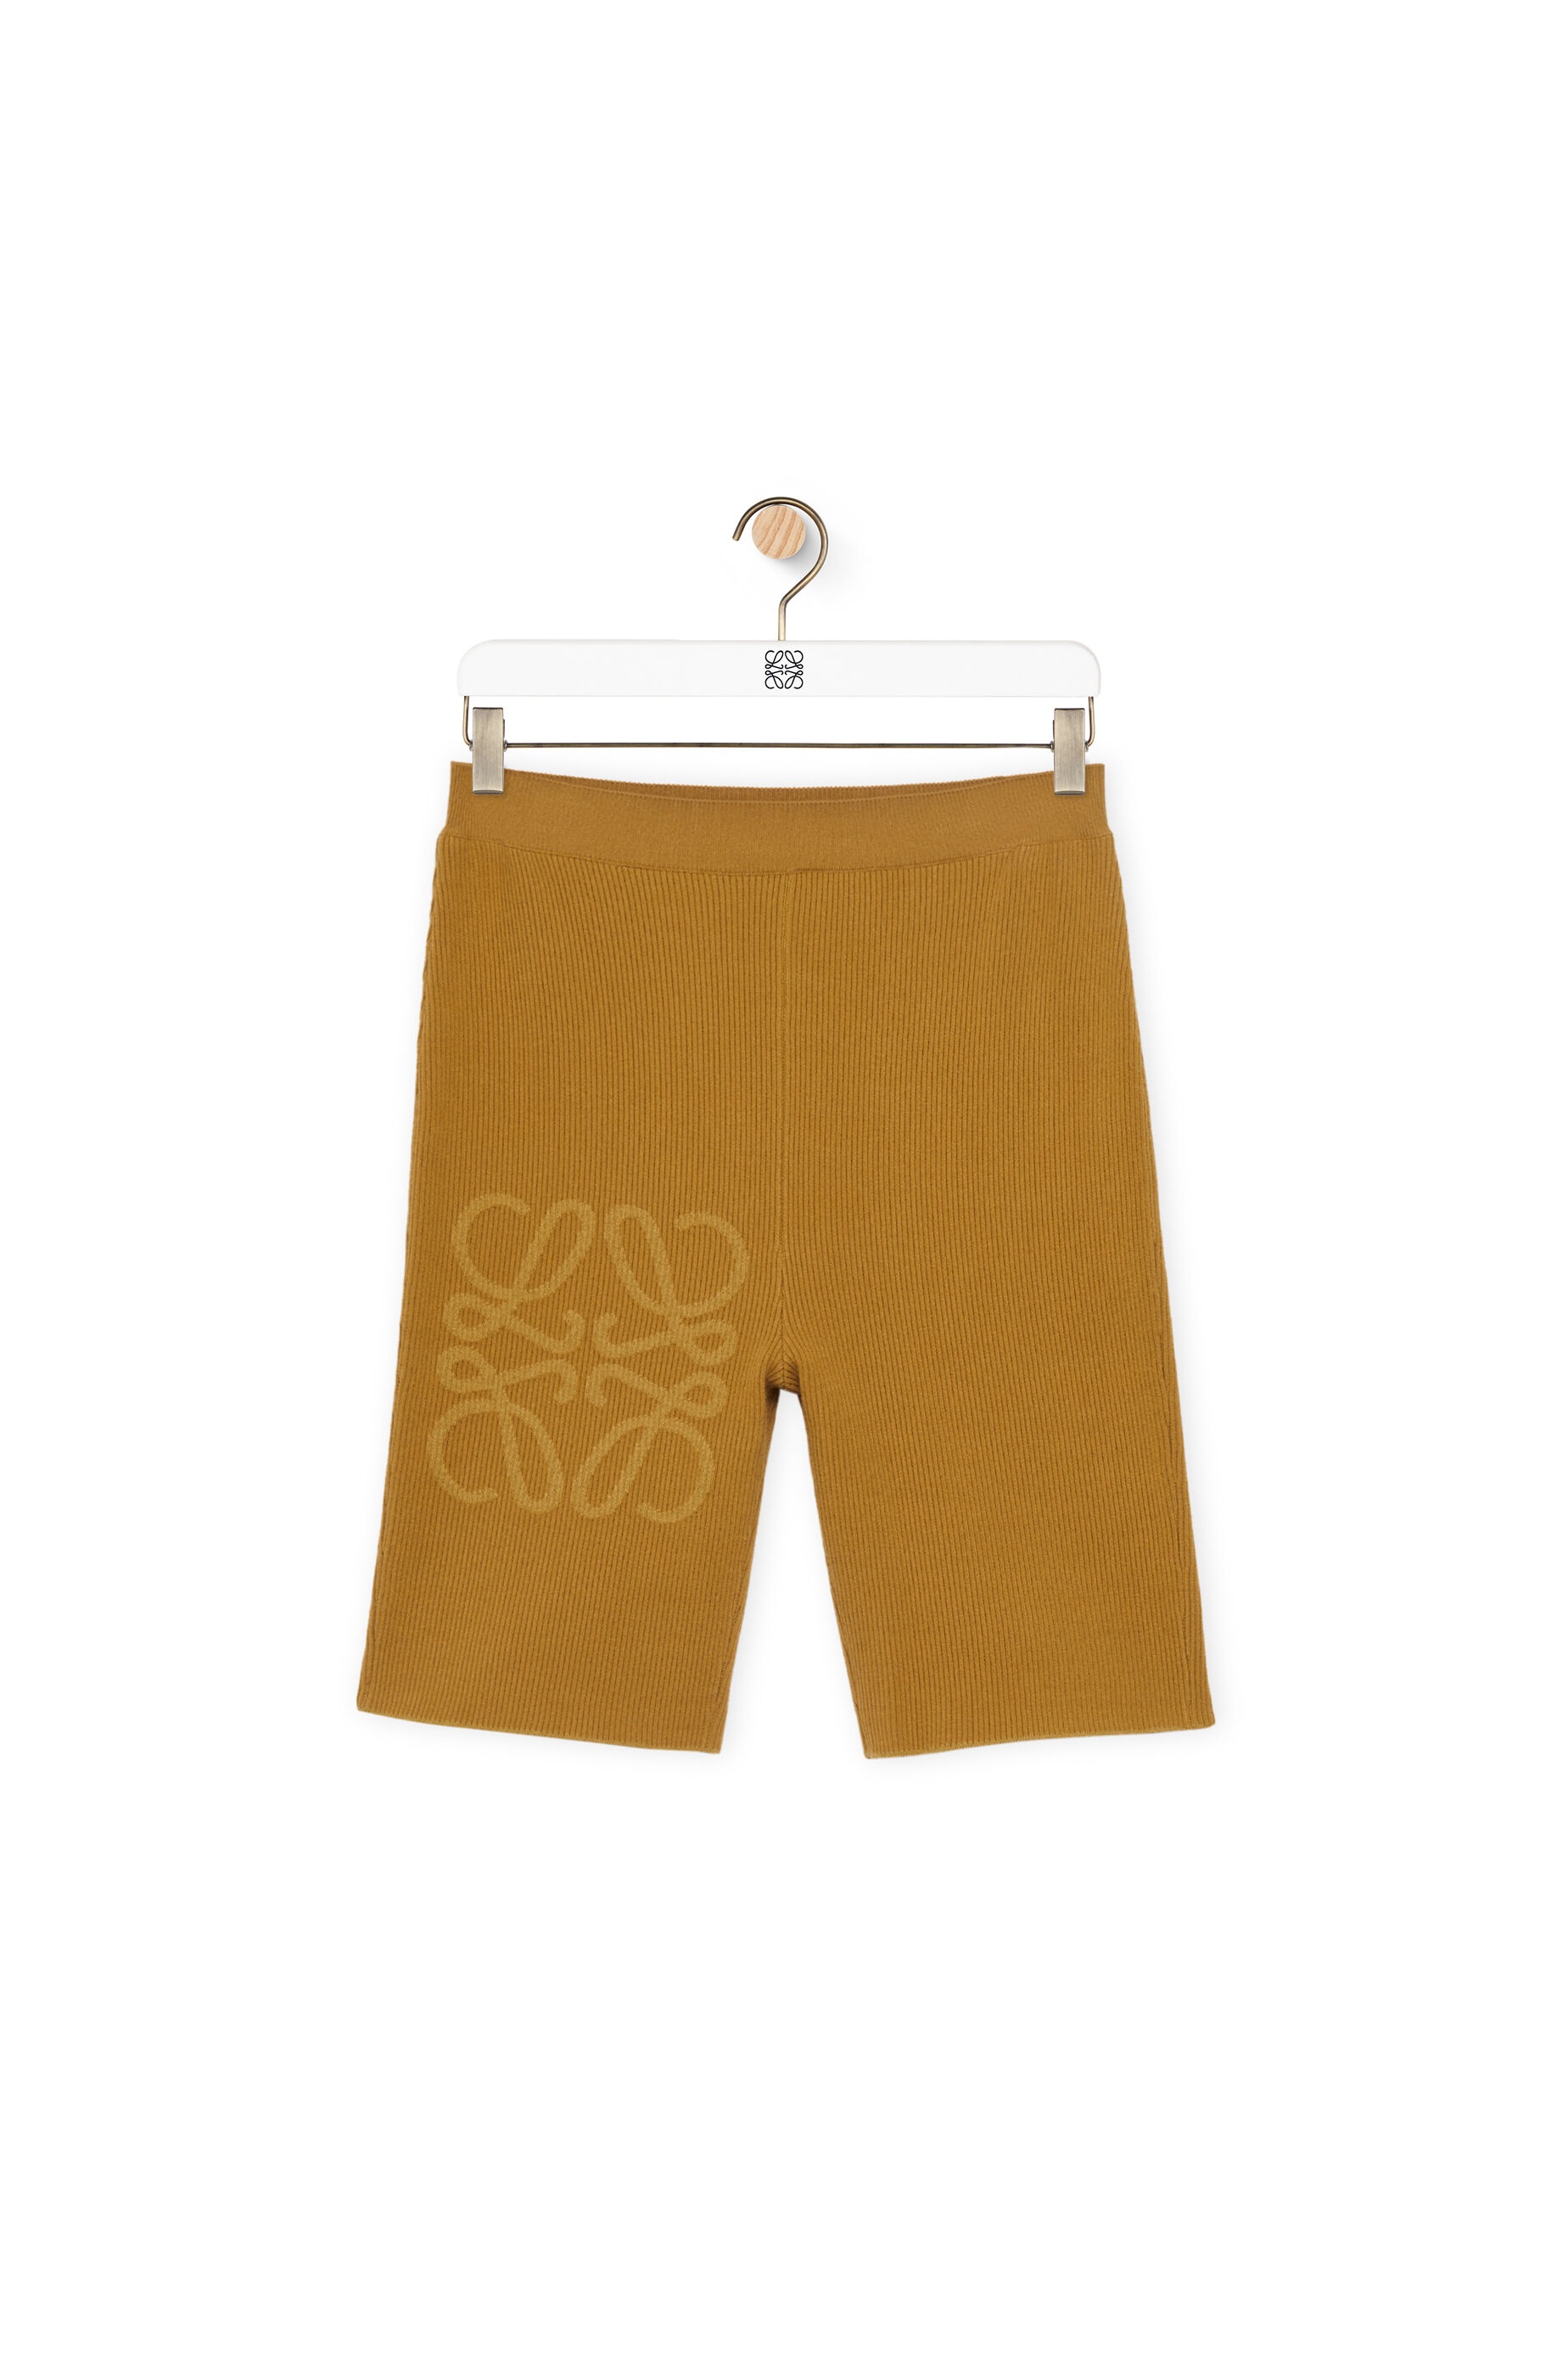 Anagram cycling shorts in cotton and viscose - 1